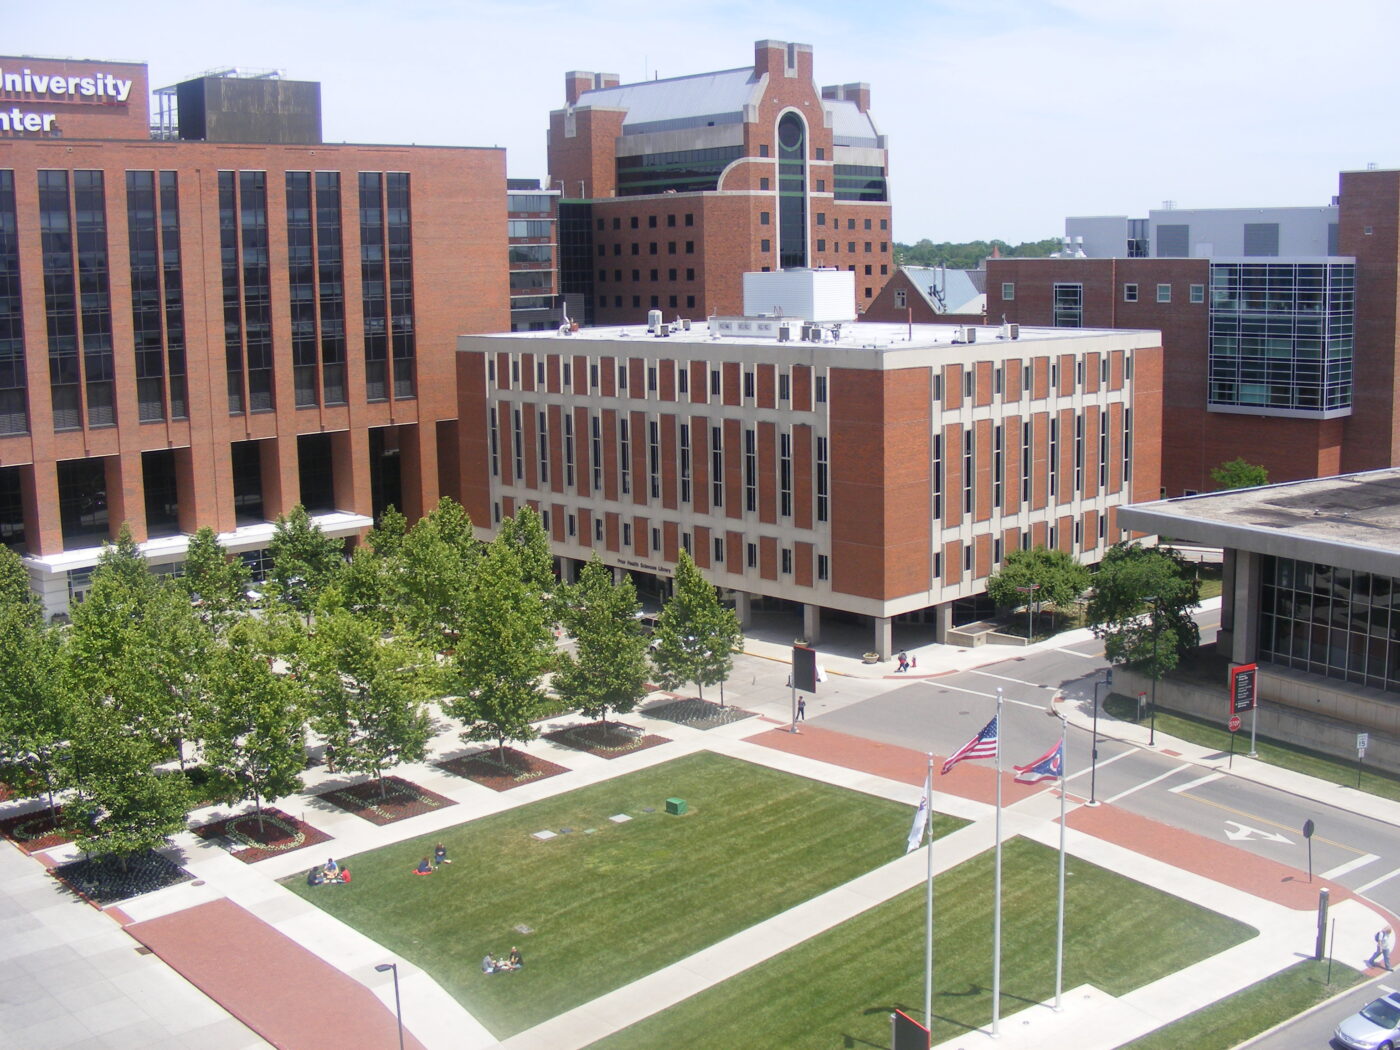 Easiest Dental Schools to Get Into - Ohio State University College of Dentistry (Columbus, OH)